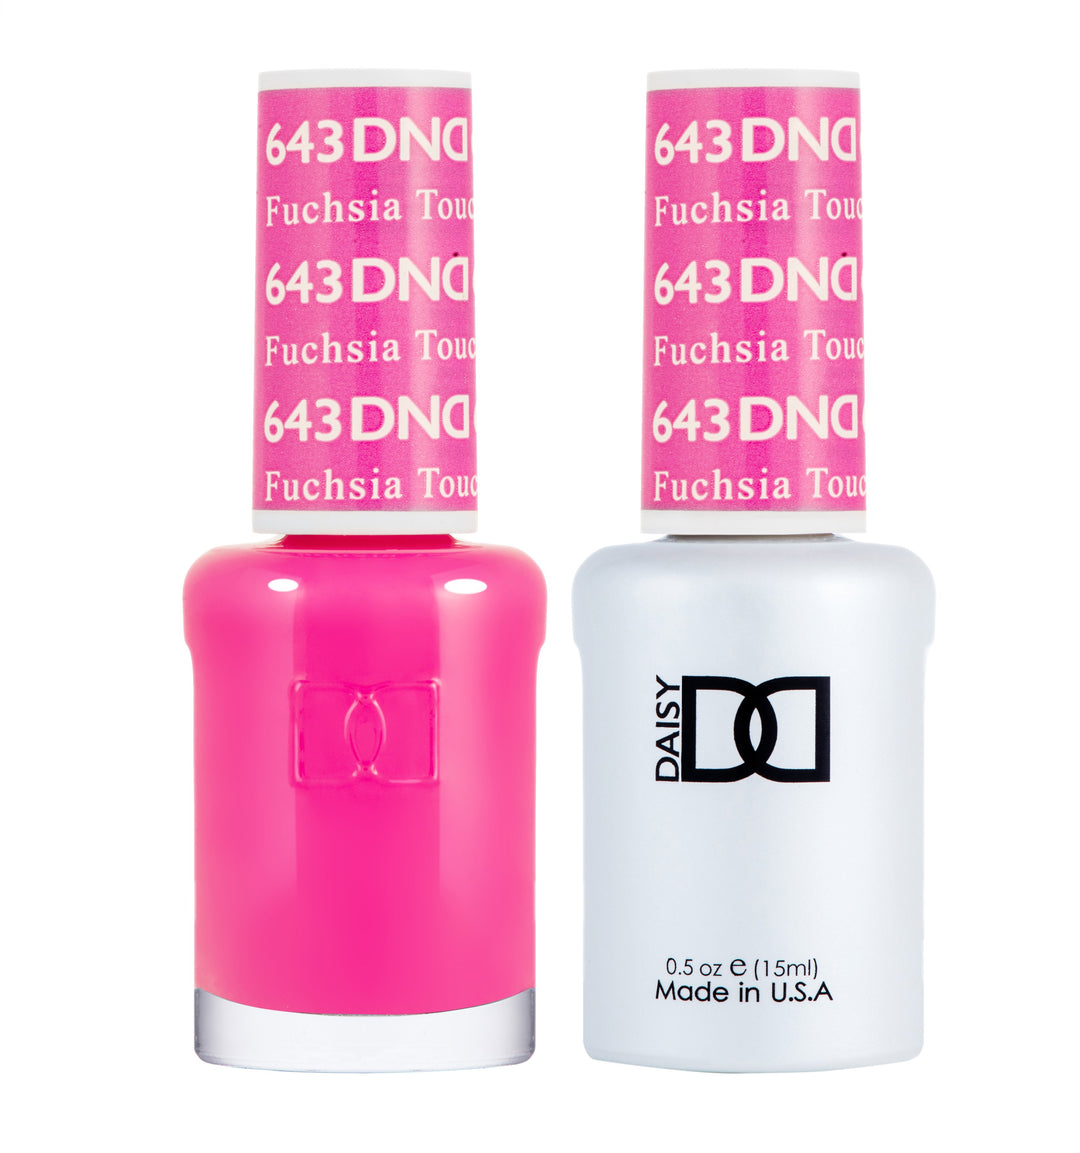 DND DUO Nail Lacquer and UV|LED Gel Polish Fuschsia Touch 643 (2 x 15ml)